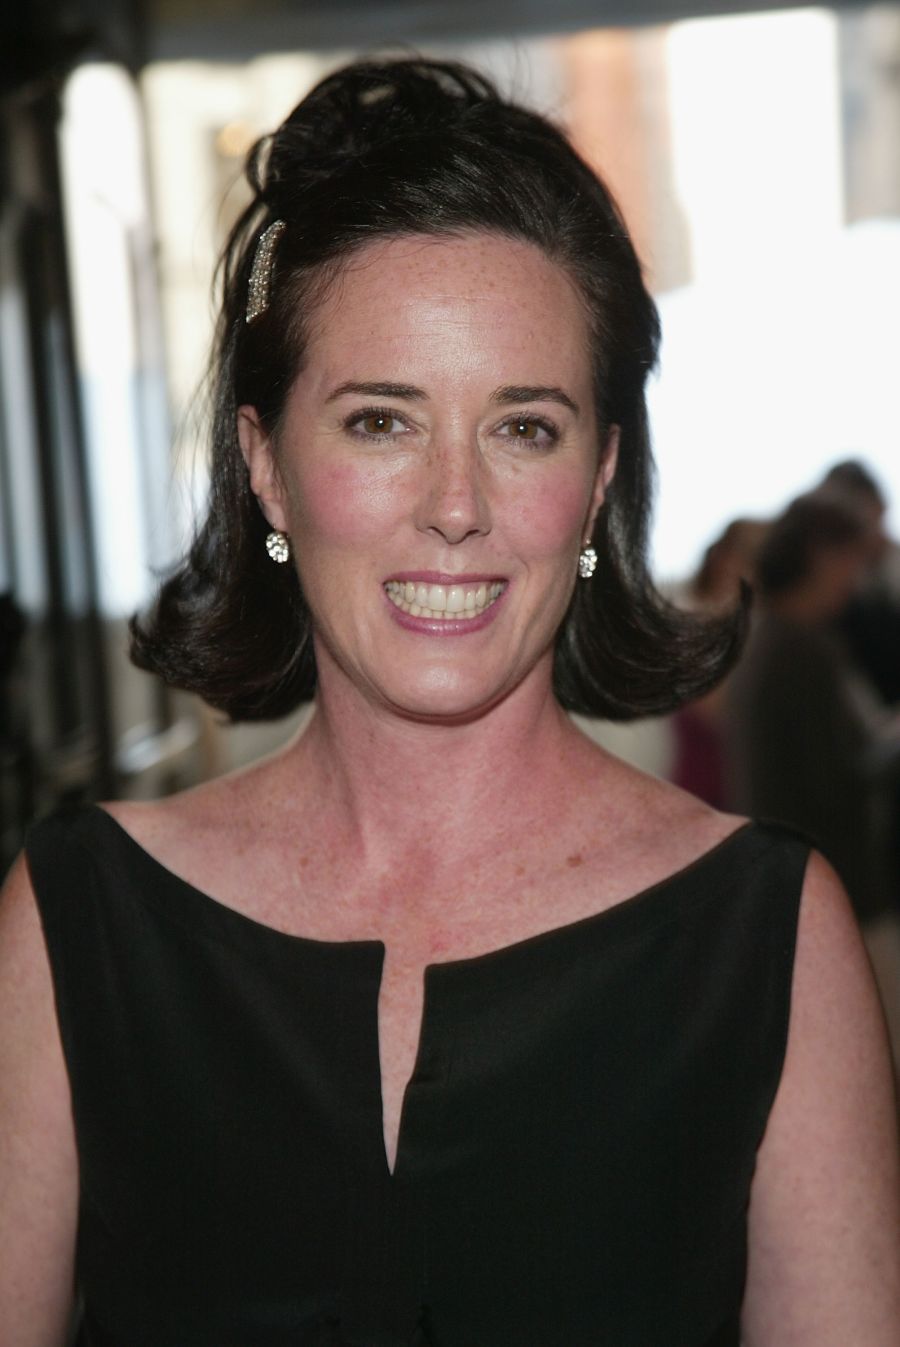 Designer Kate Spade found dead in apparent suicide | Houston Style